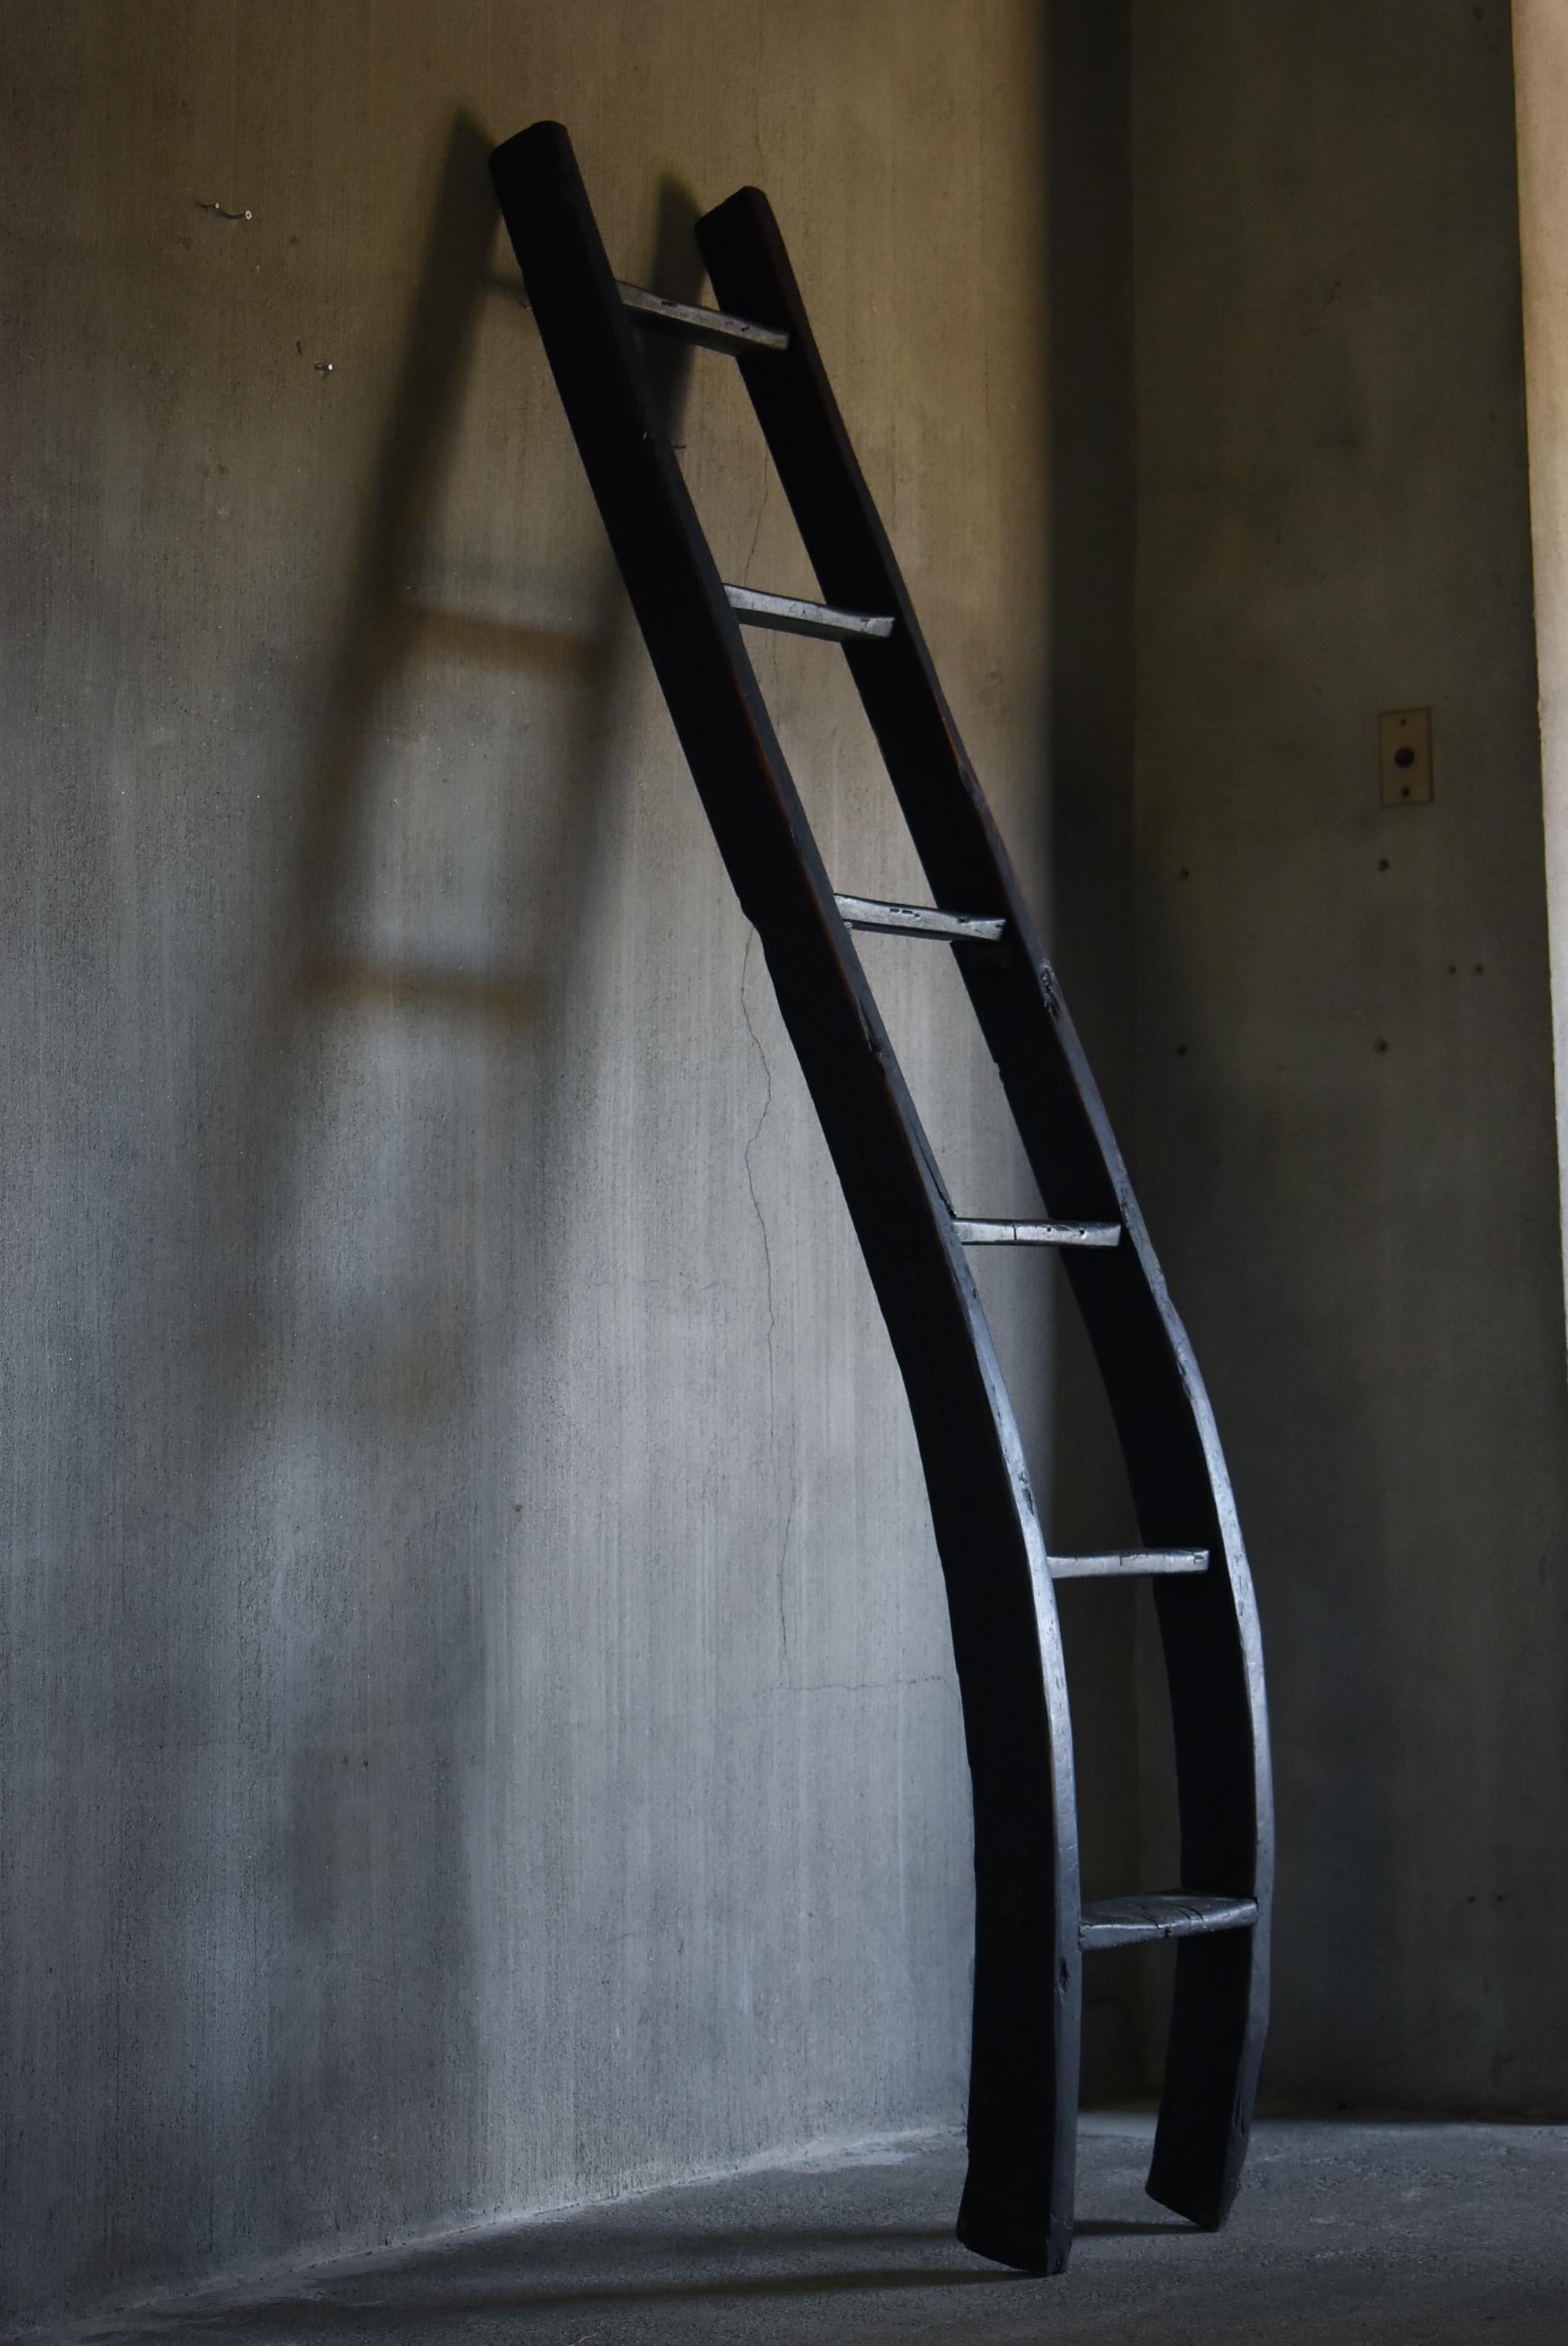 It is a ladder of an old Japanese private house.
It is an item from the Edo period.

This is black and beautiful.
Why is it black?
Because there is soot.
Japan has a hearth culture.
When the soot from the hearth reaches the ladder, it turns